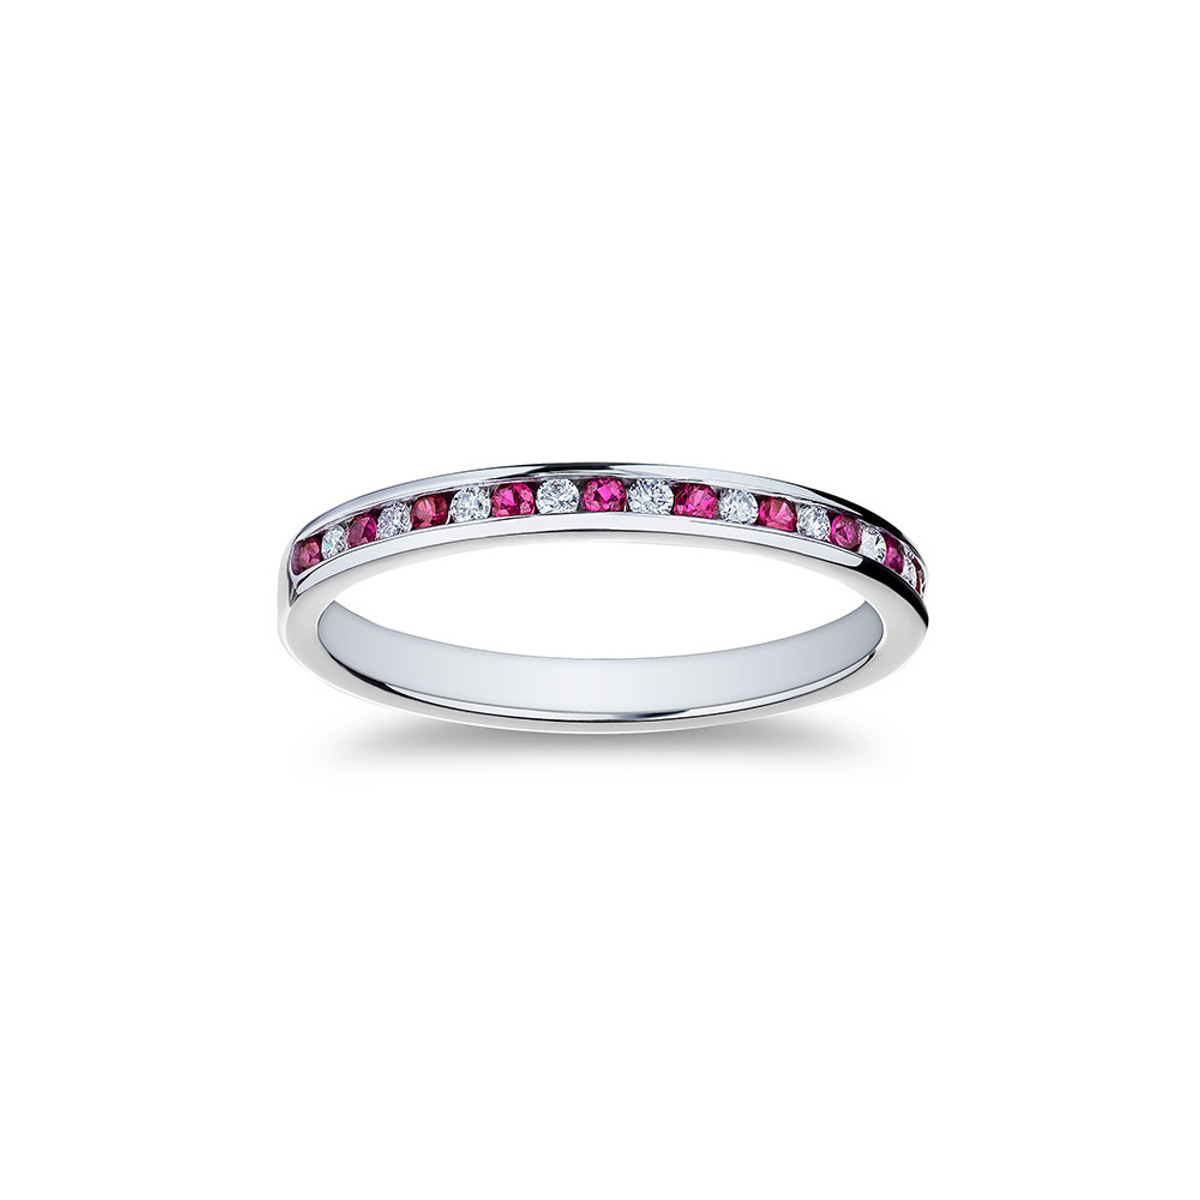 18KW DIAMOND AND RUBY BAND 11RB=0.11CTTW 12R=0.15CTTW-43609 Product Image